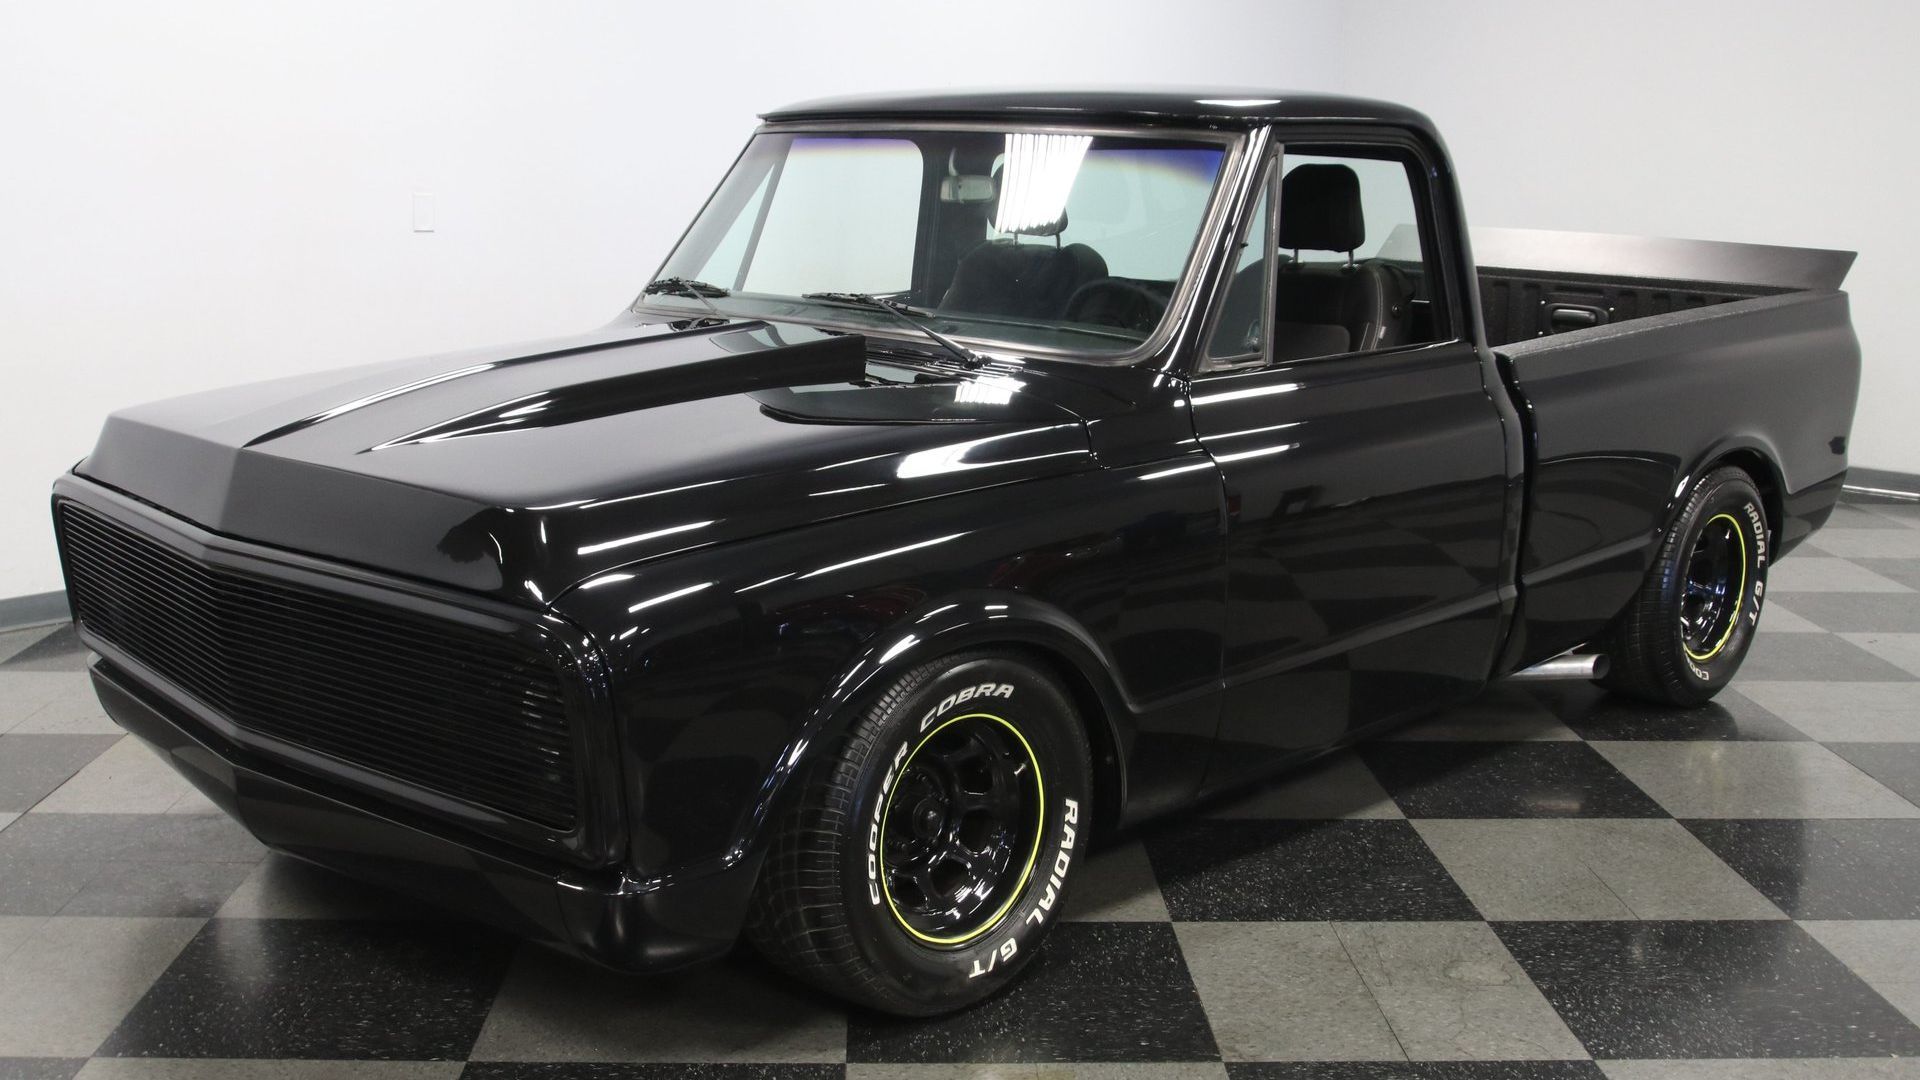 1970 Chevy C10 Restomod Has A Mean Bite